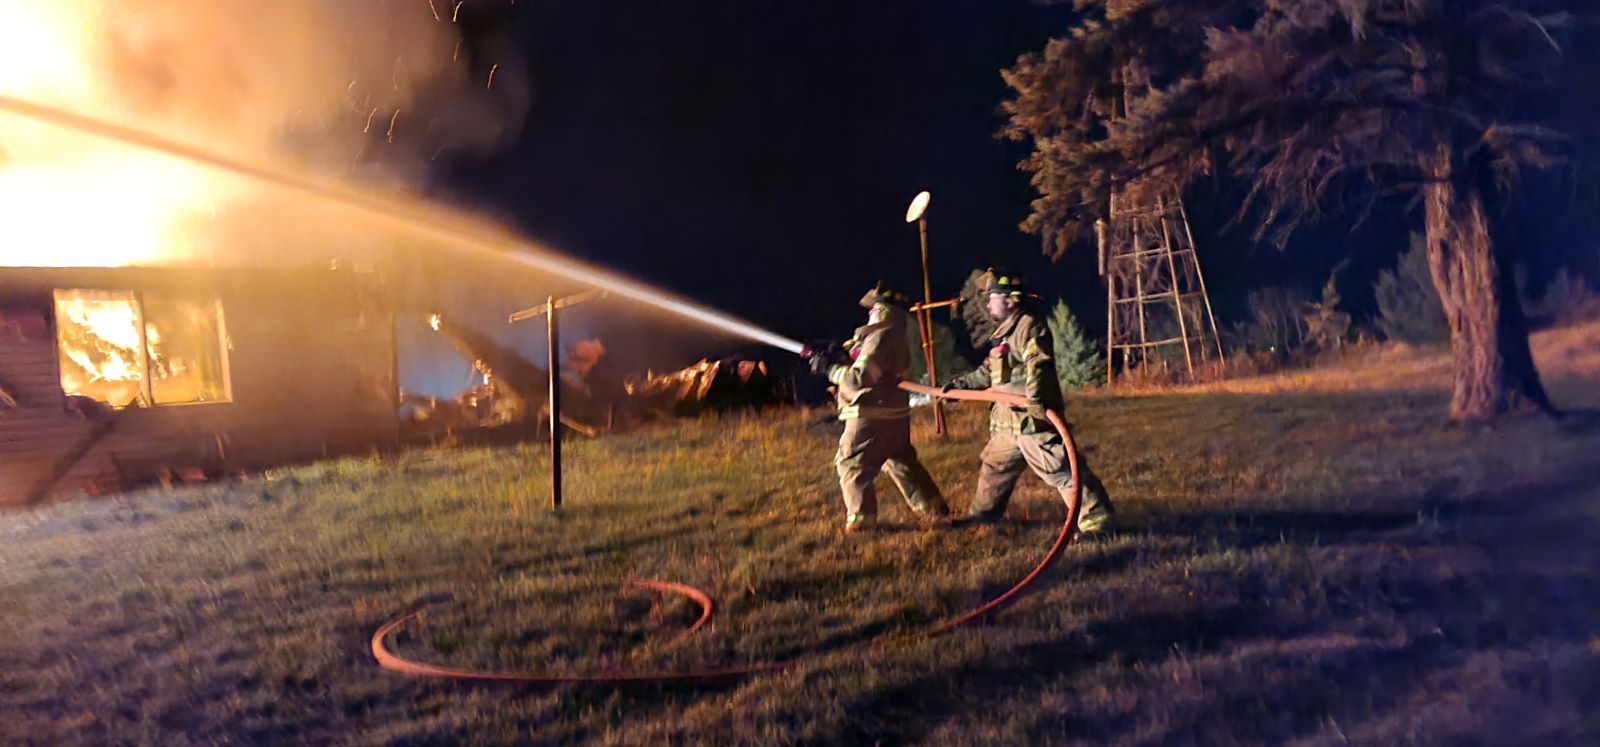 Firefighter with hose fighting house fire